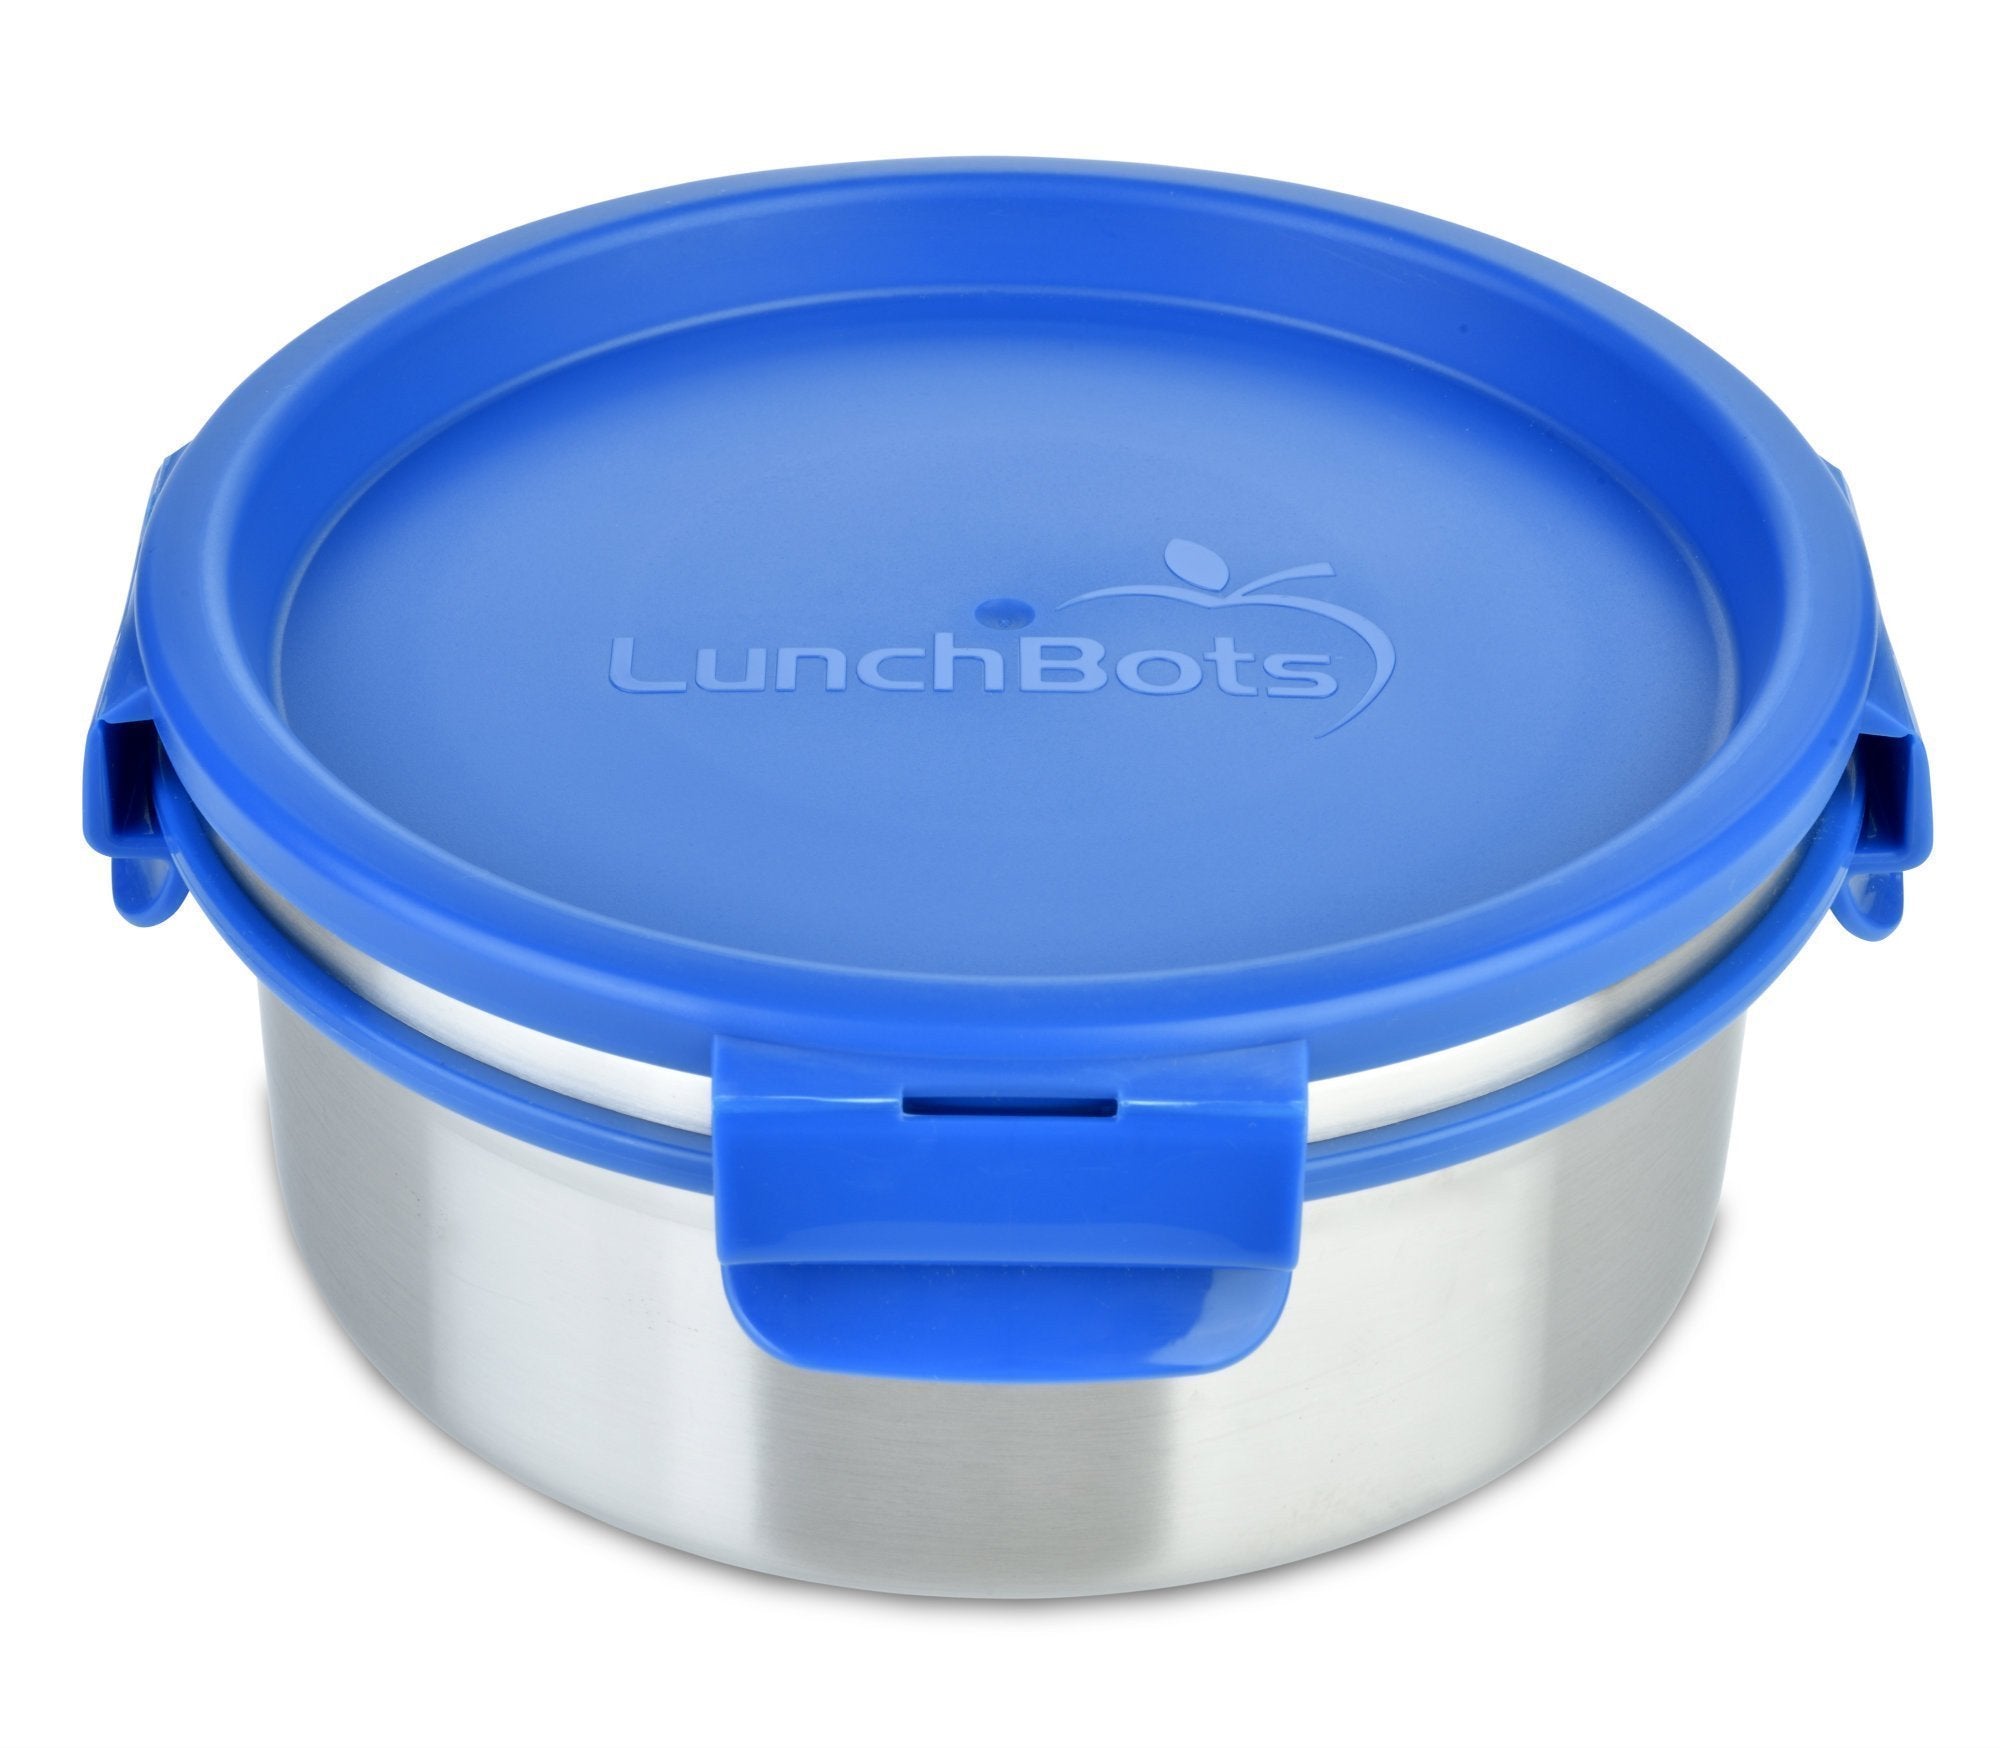 Lunchbots Clicks 1000ml 4 Cups Leak Proof Food Container Eqo Living